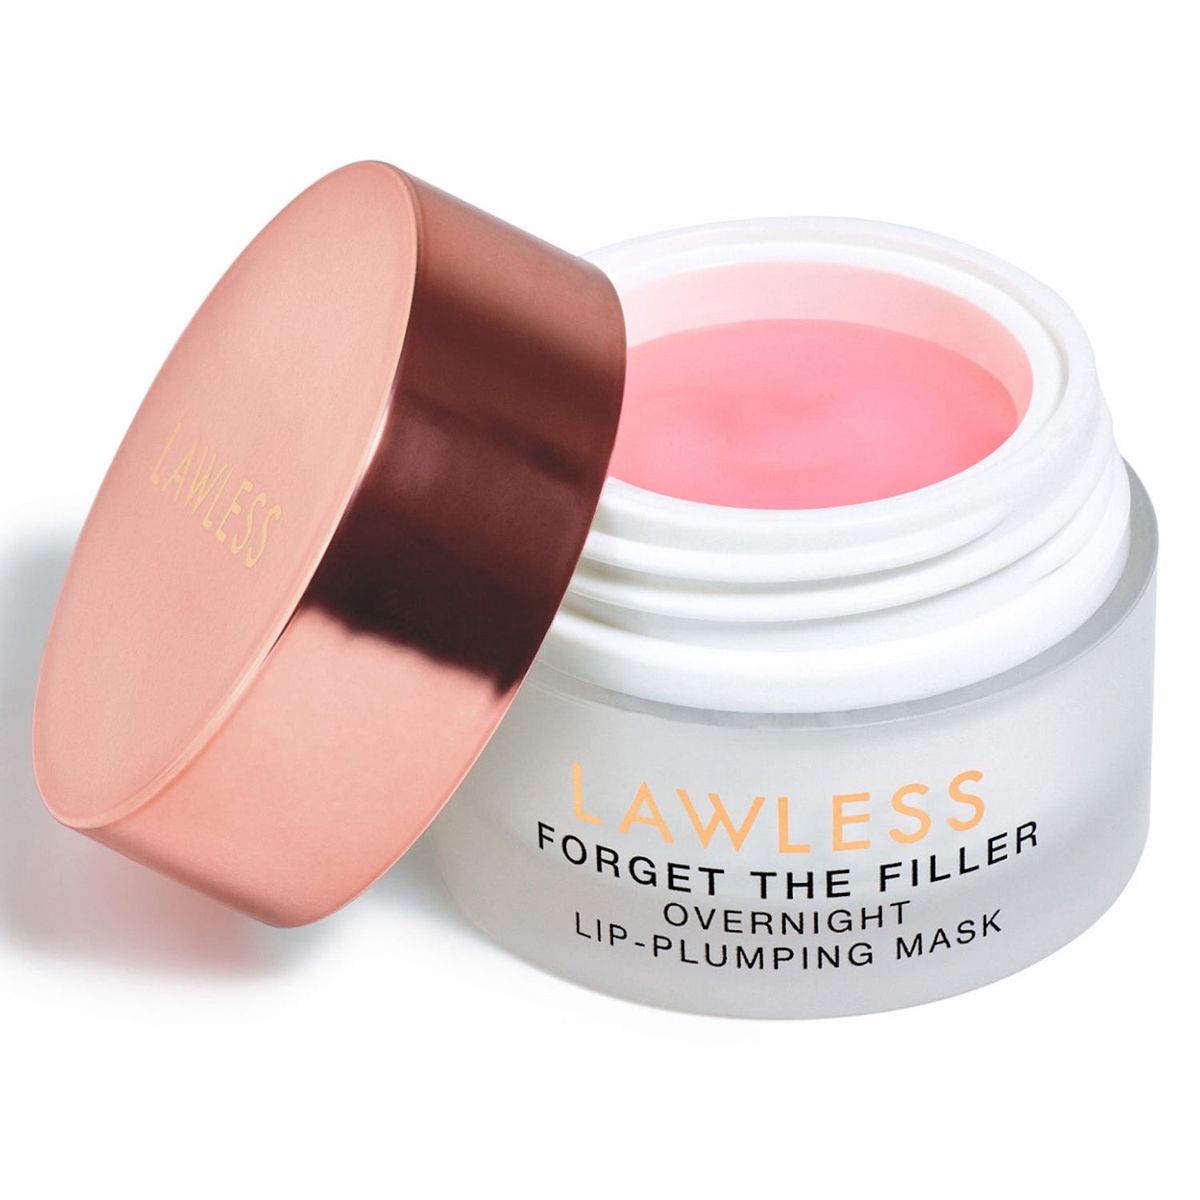 FORGET THE FILLER OVERNIGHT LIP-PLUMPING MASK Review